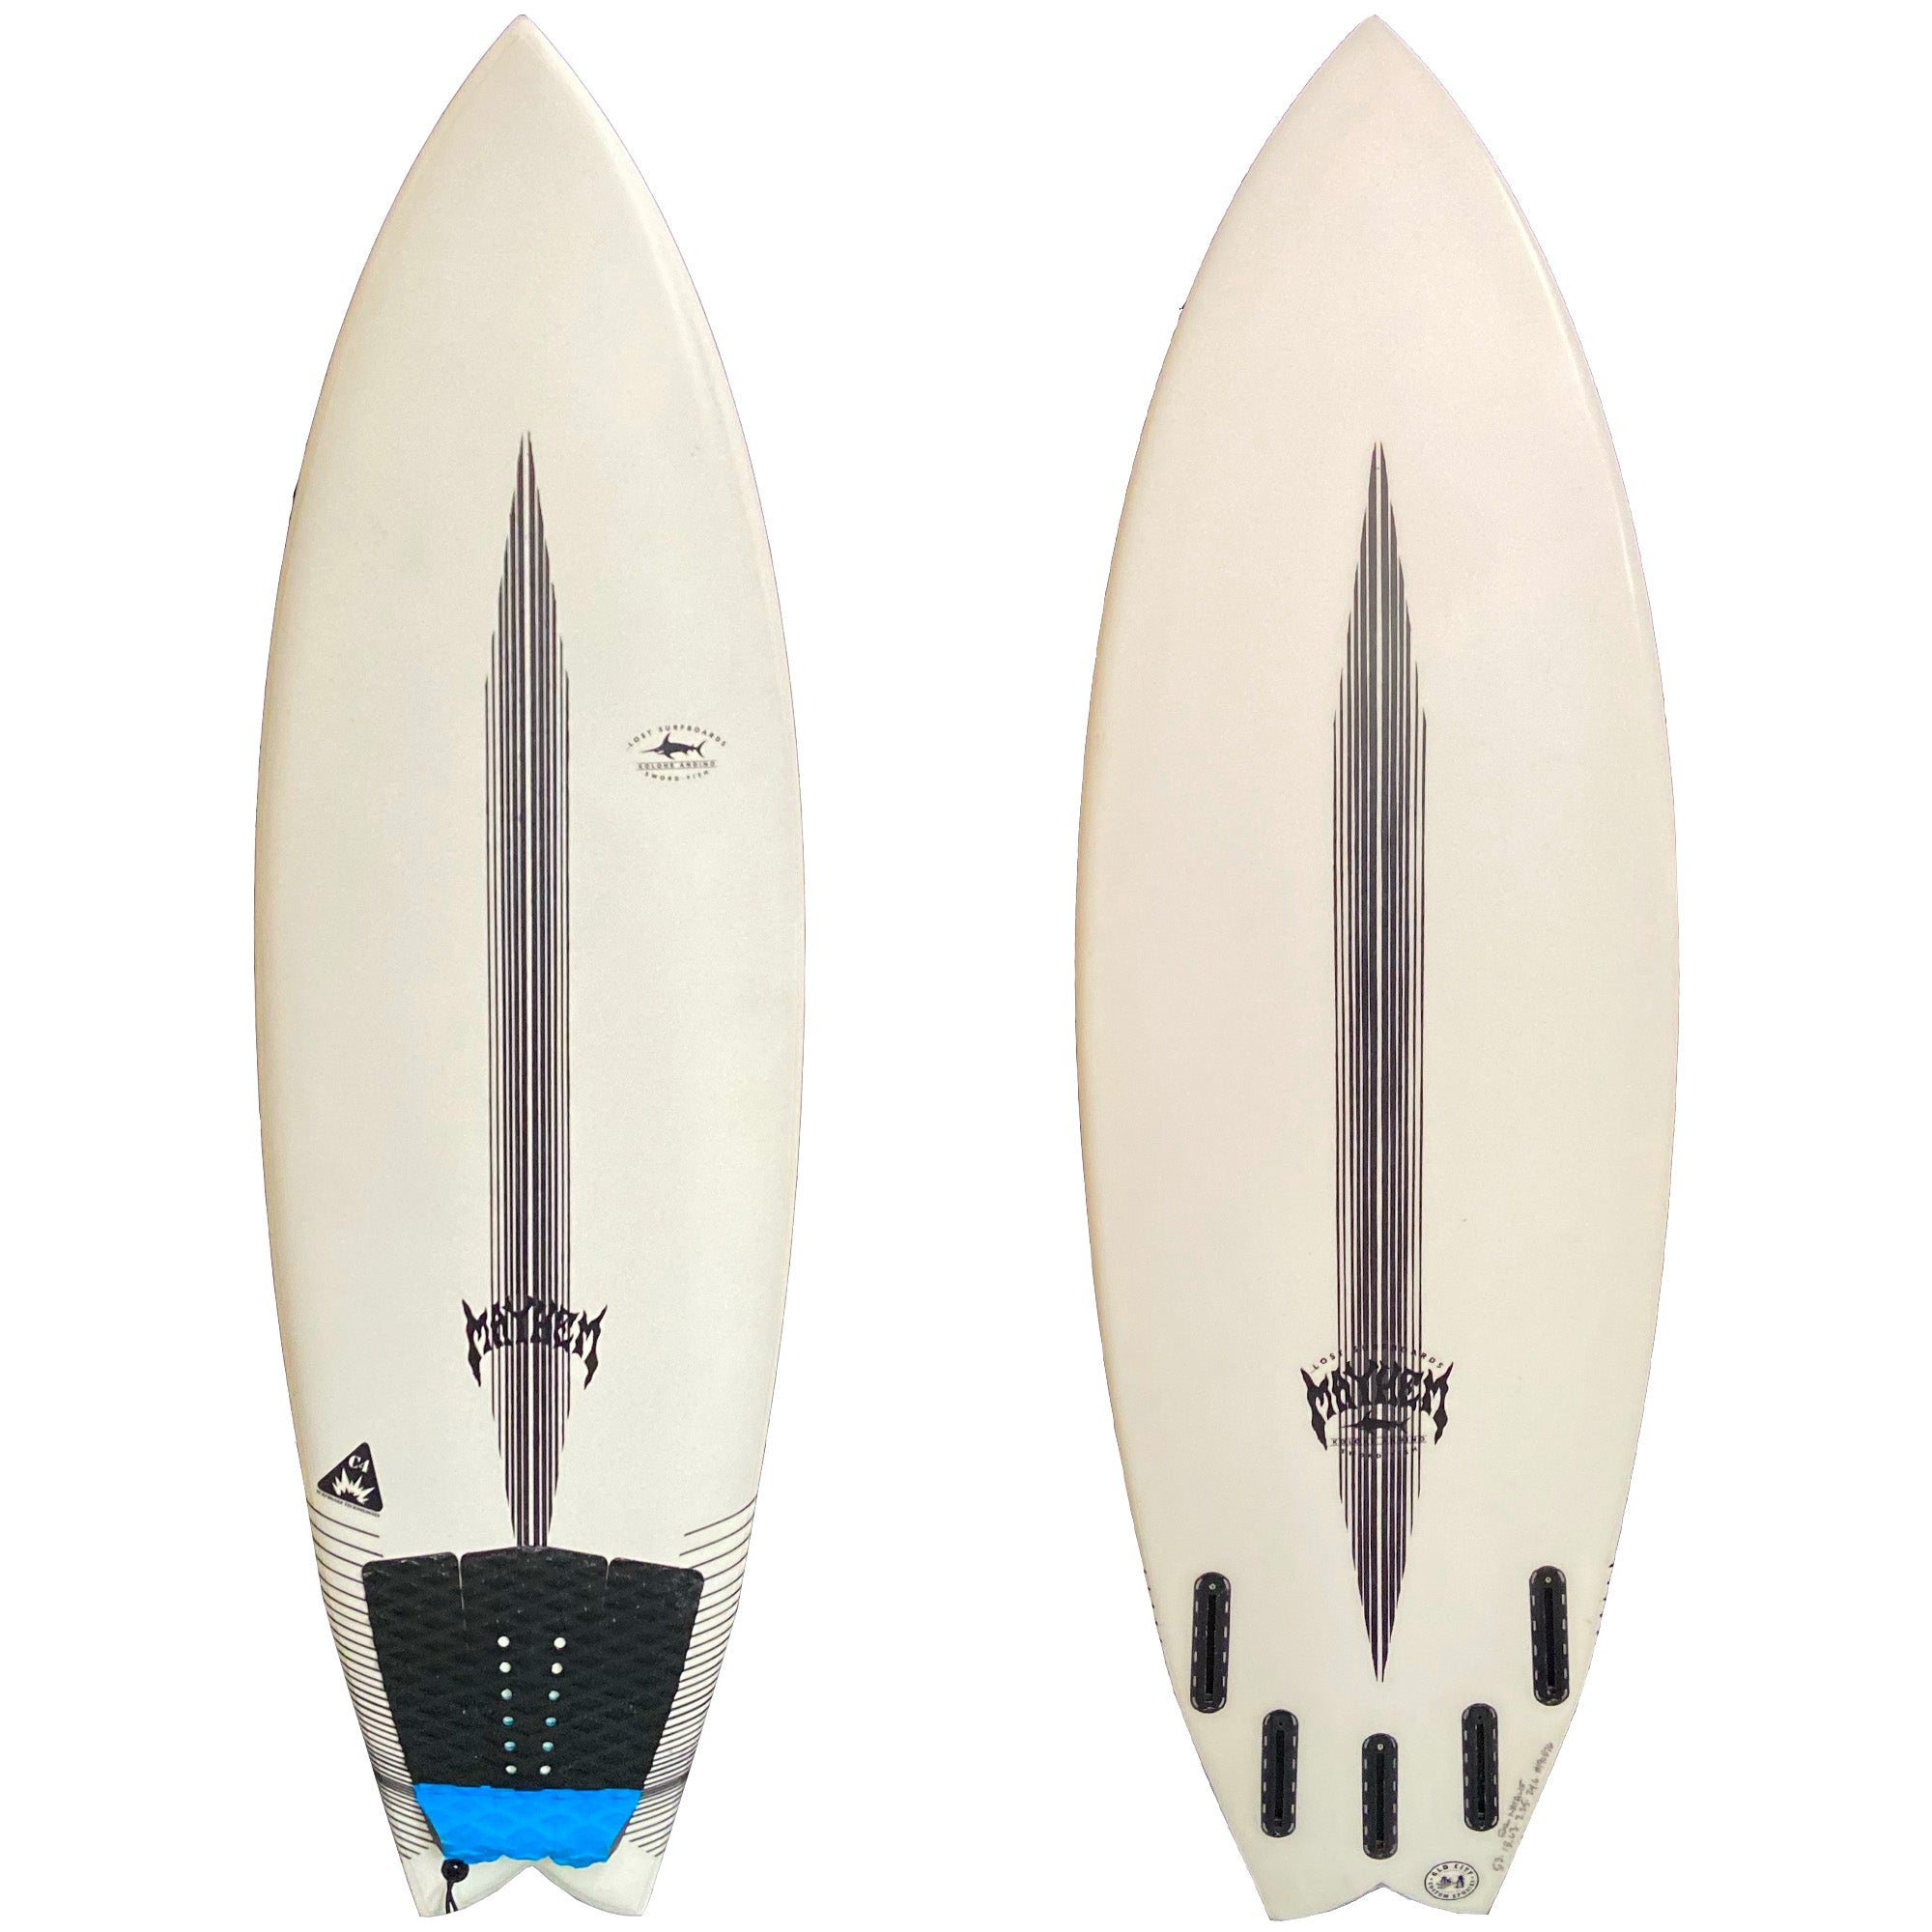 Lost Sword-Fish 5'3 Consignment Surfboard